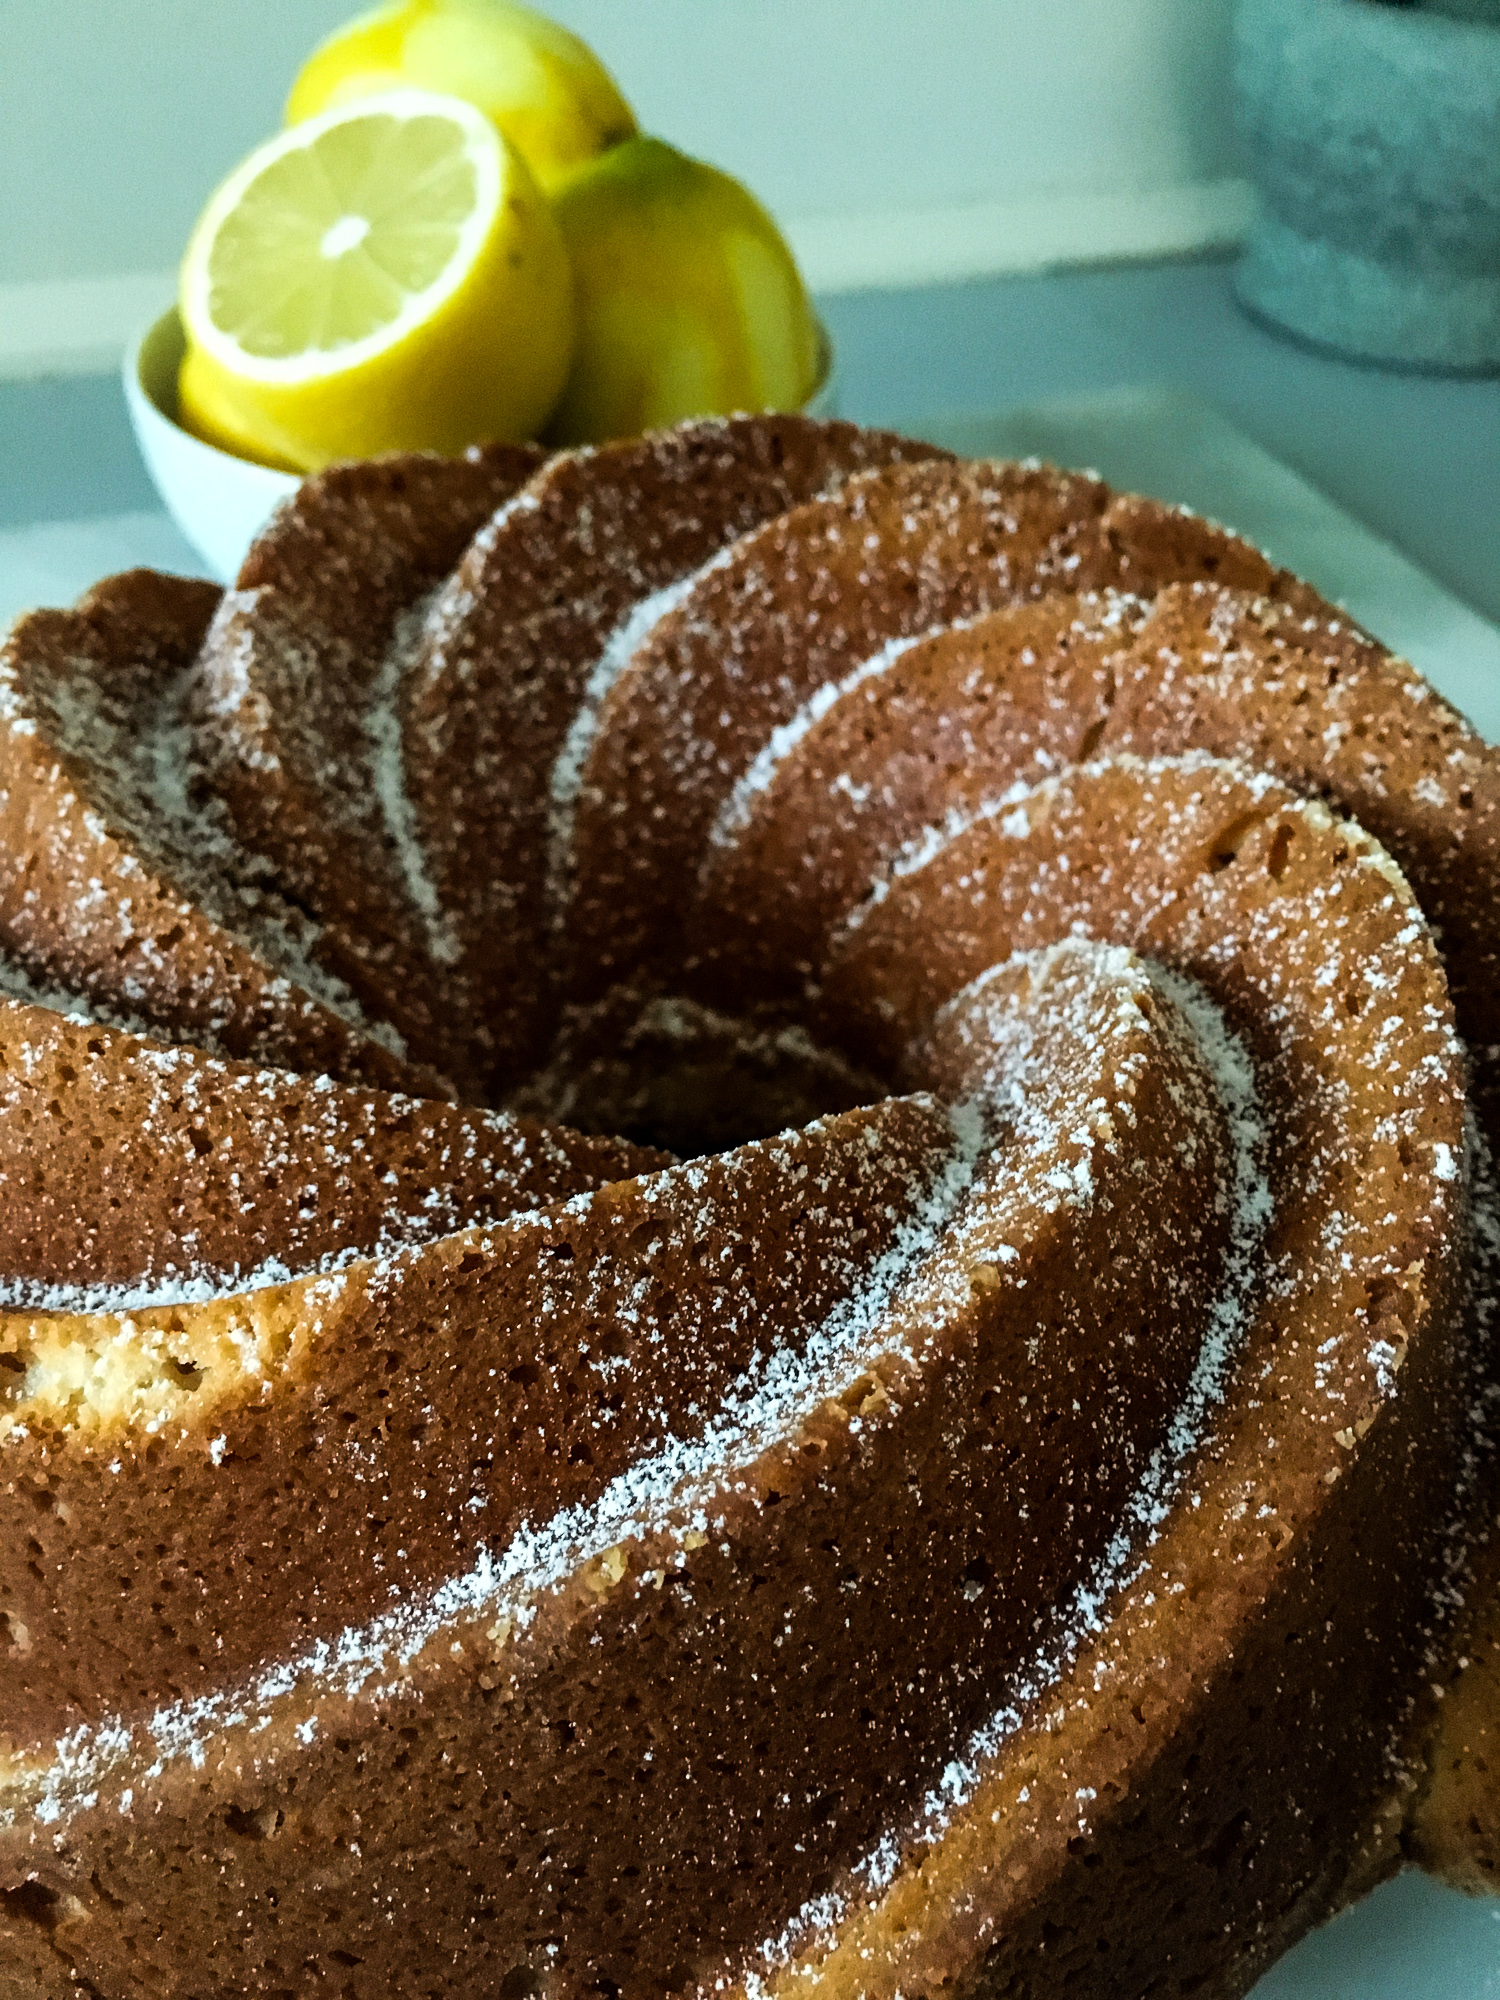 Ricotta cake dusted with icing sugar